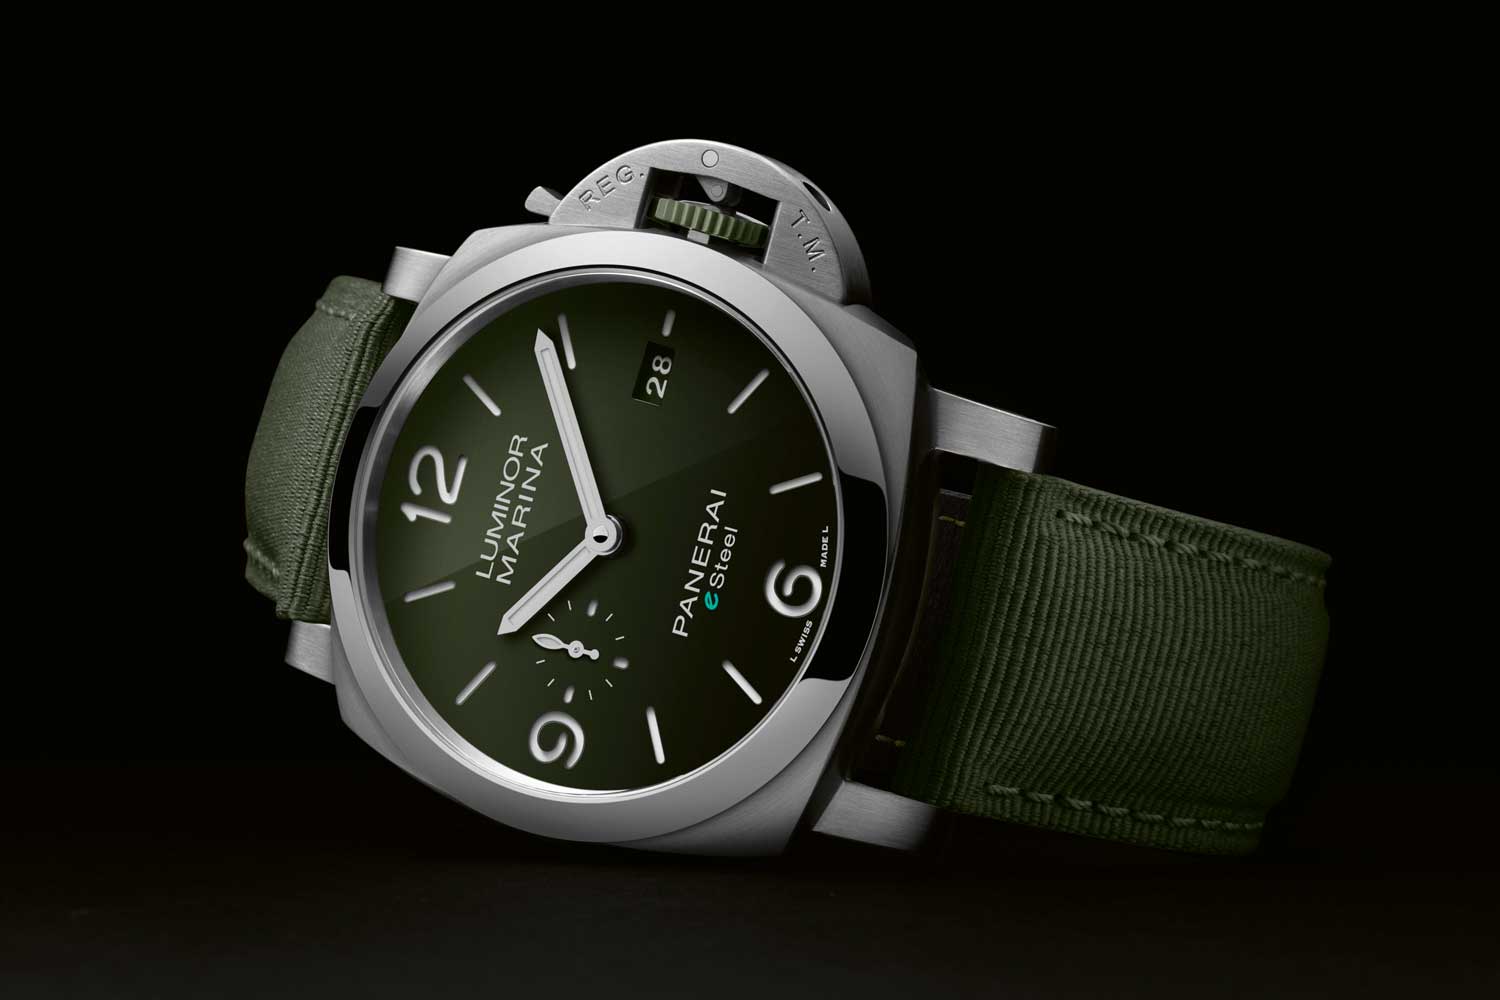 The familiar shape of the Luminor Marina case belies the fact that more than half of this eSteel reference is recycled